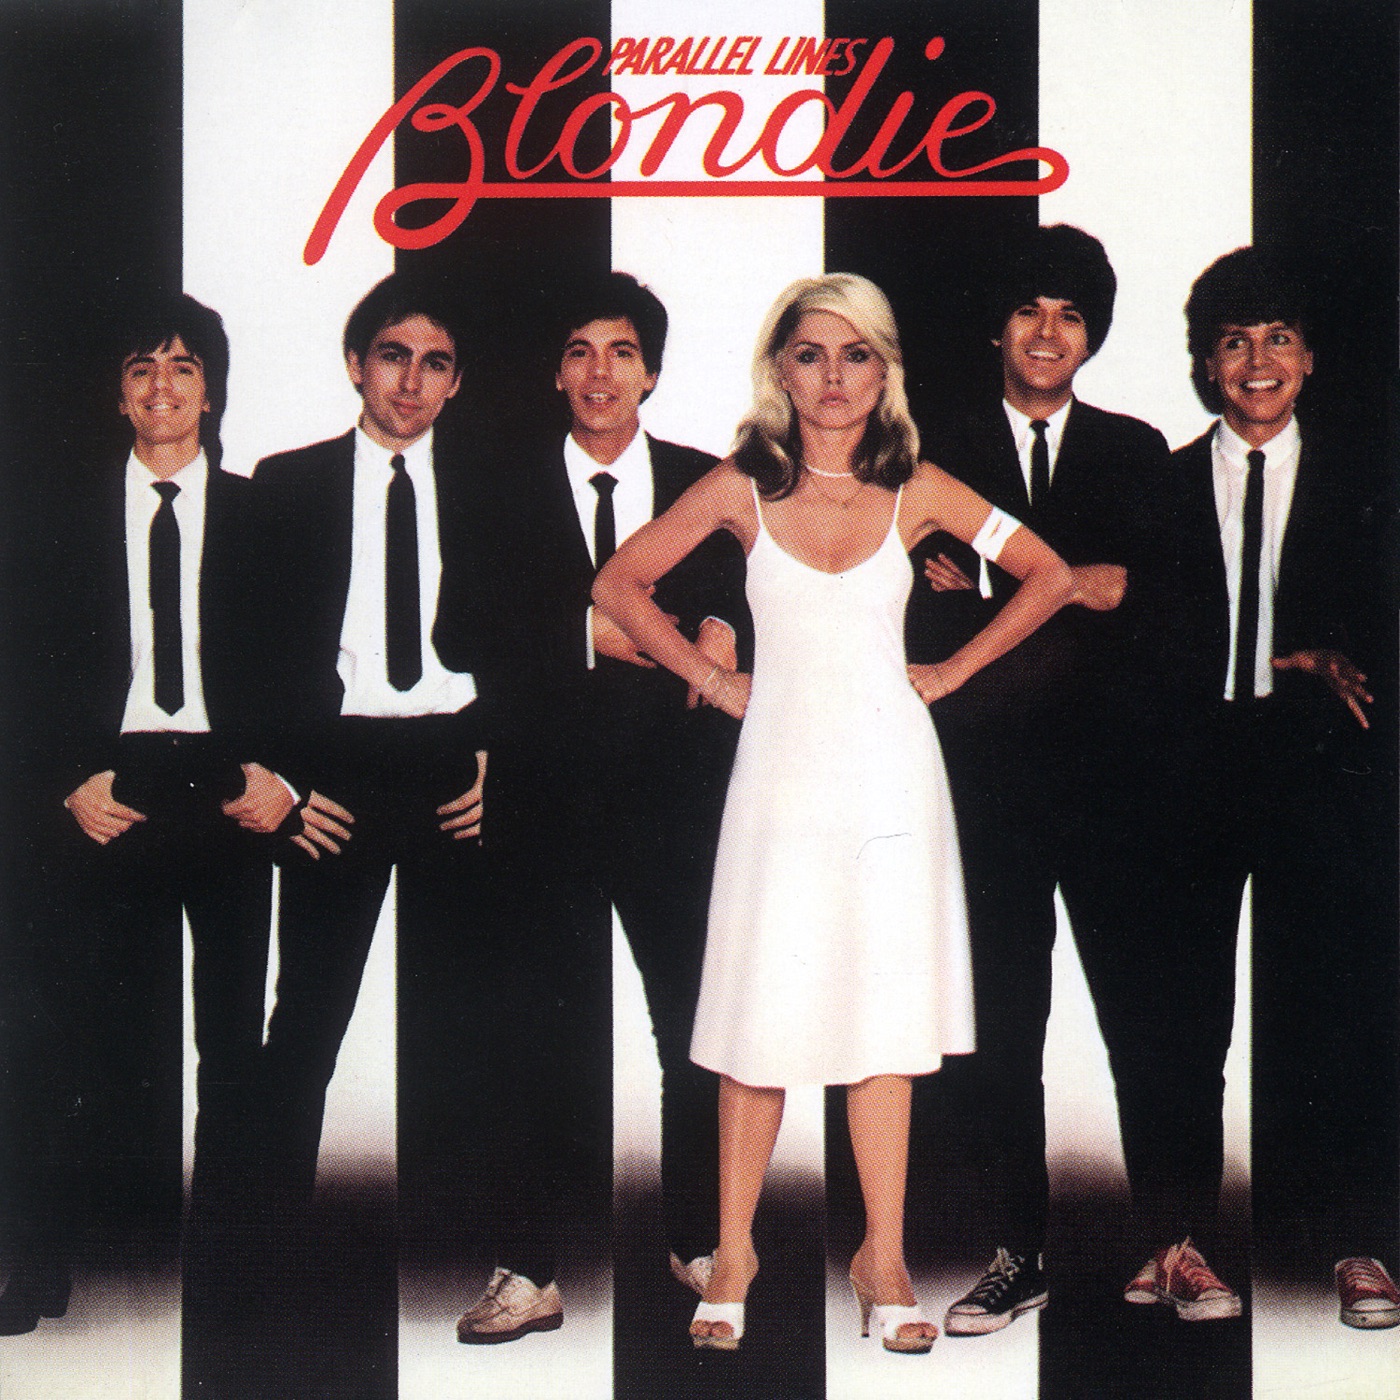 One Way or Another by Blondie